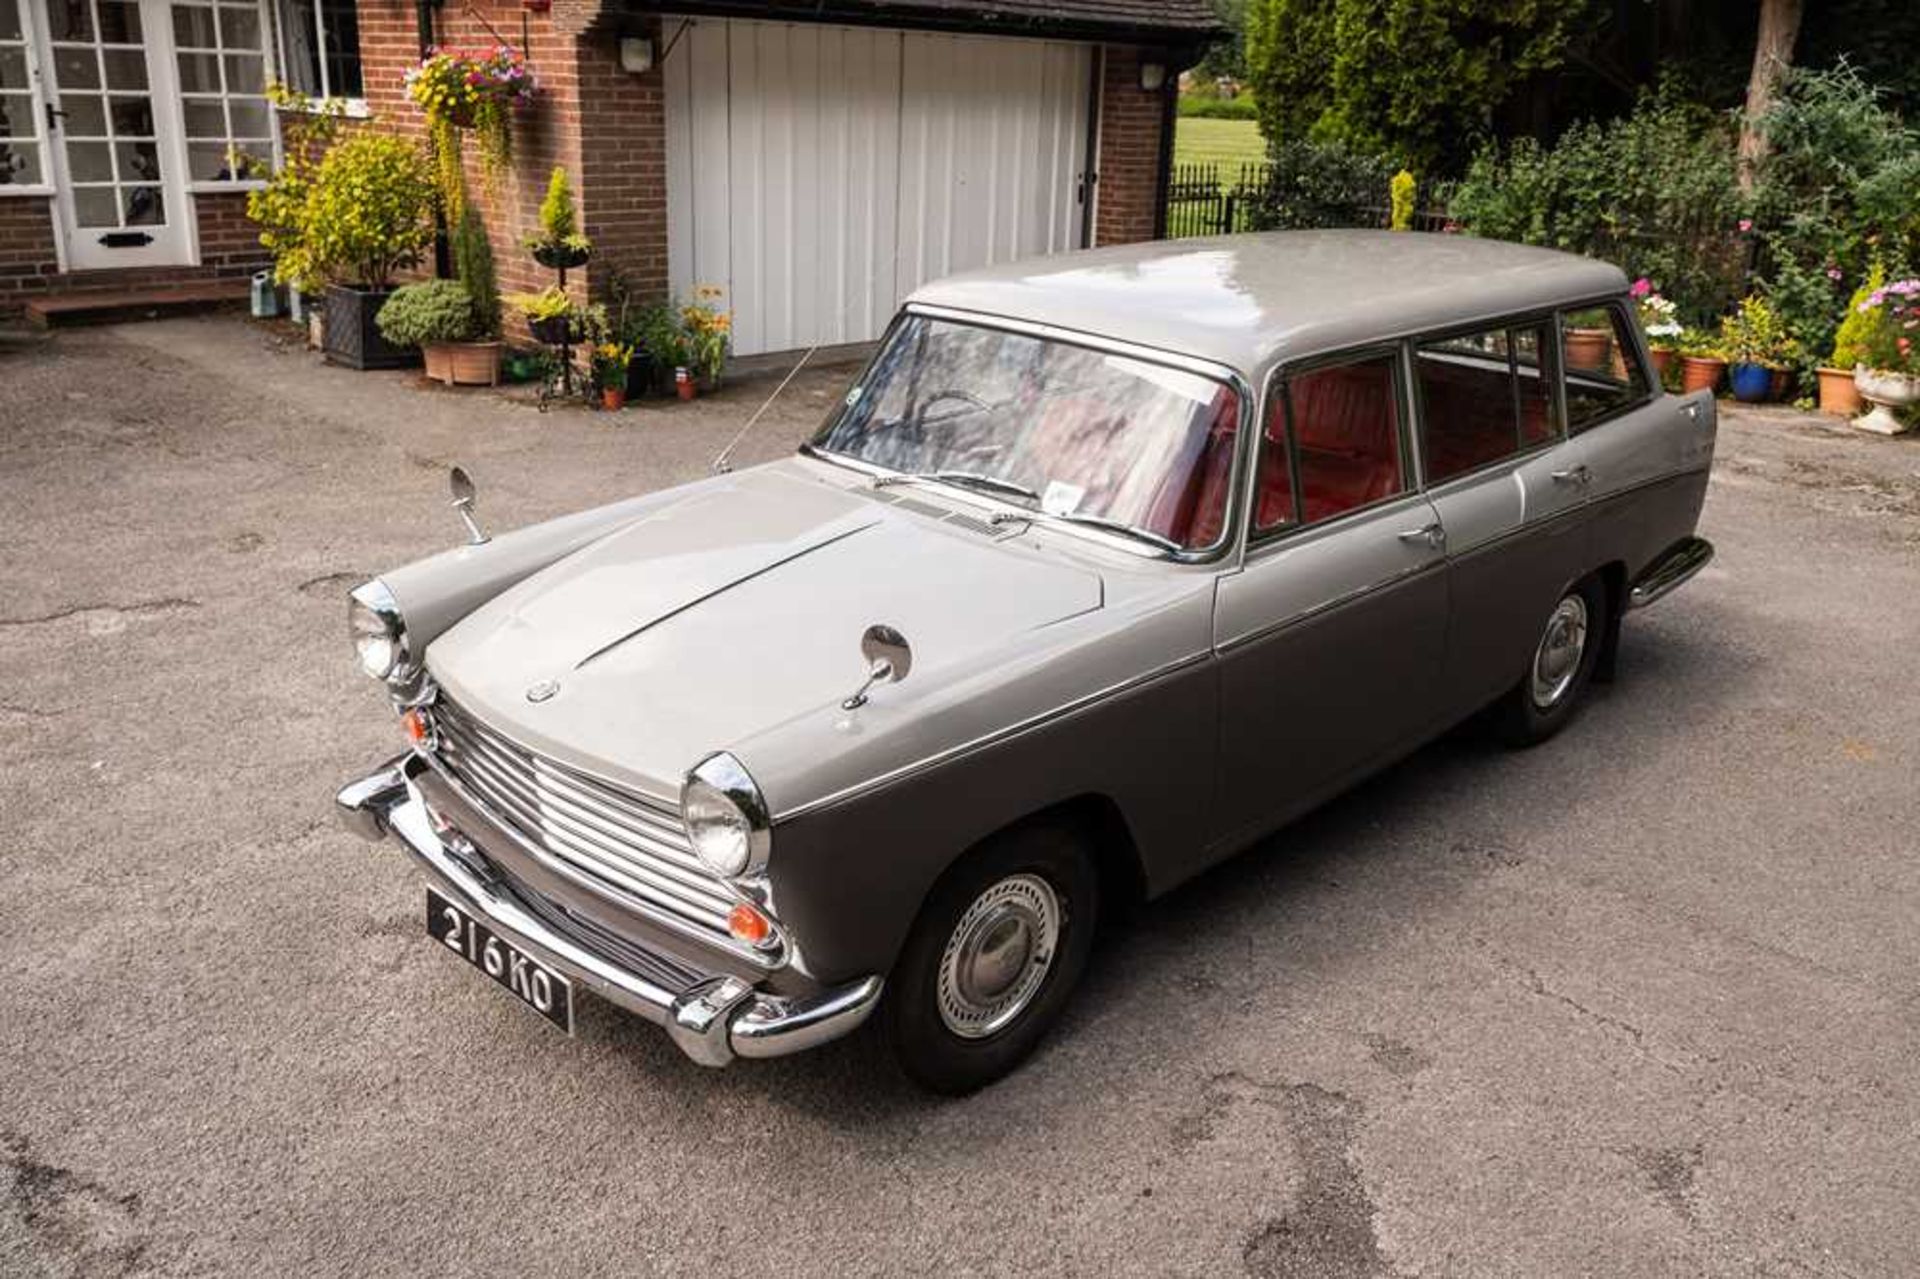 1964 Morris Oxford Series VI Farina Traveller Just 7,000 miles from new - Image 8 of 98